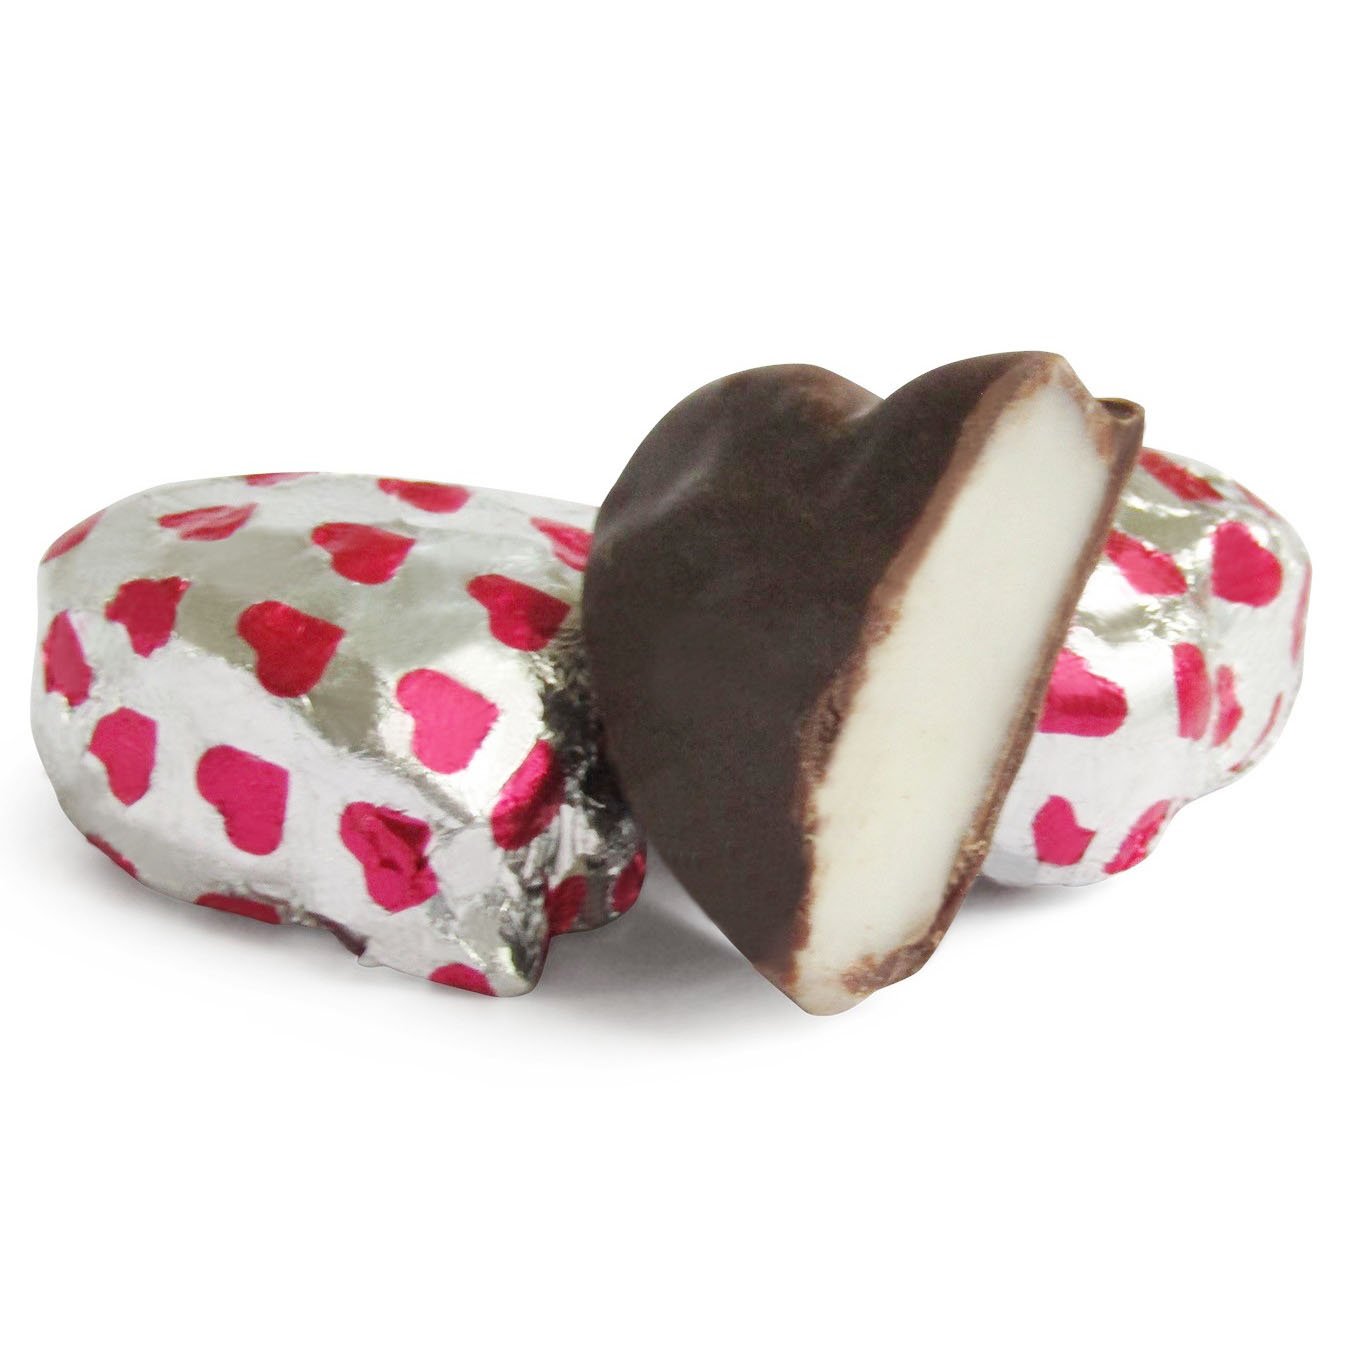 Raspberry Crème Chocolates Hearts (Silver & Red Foil)